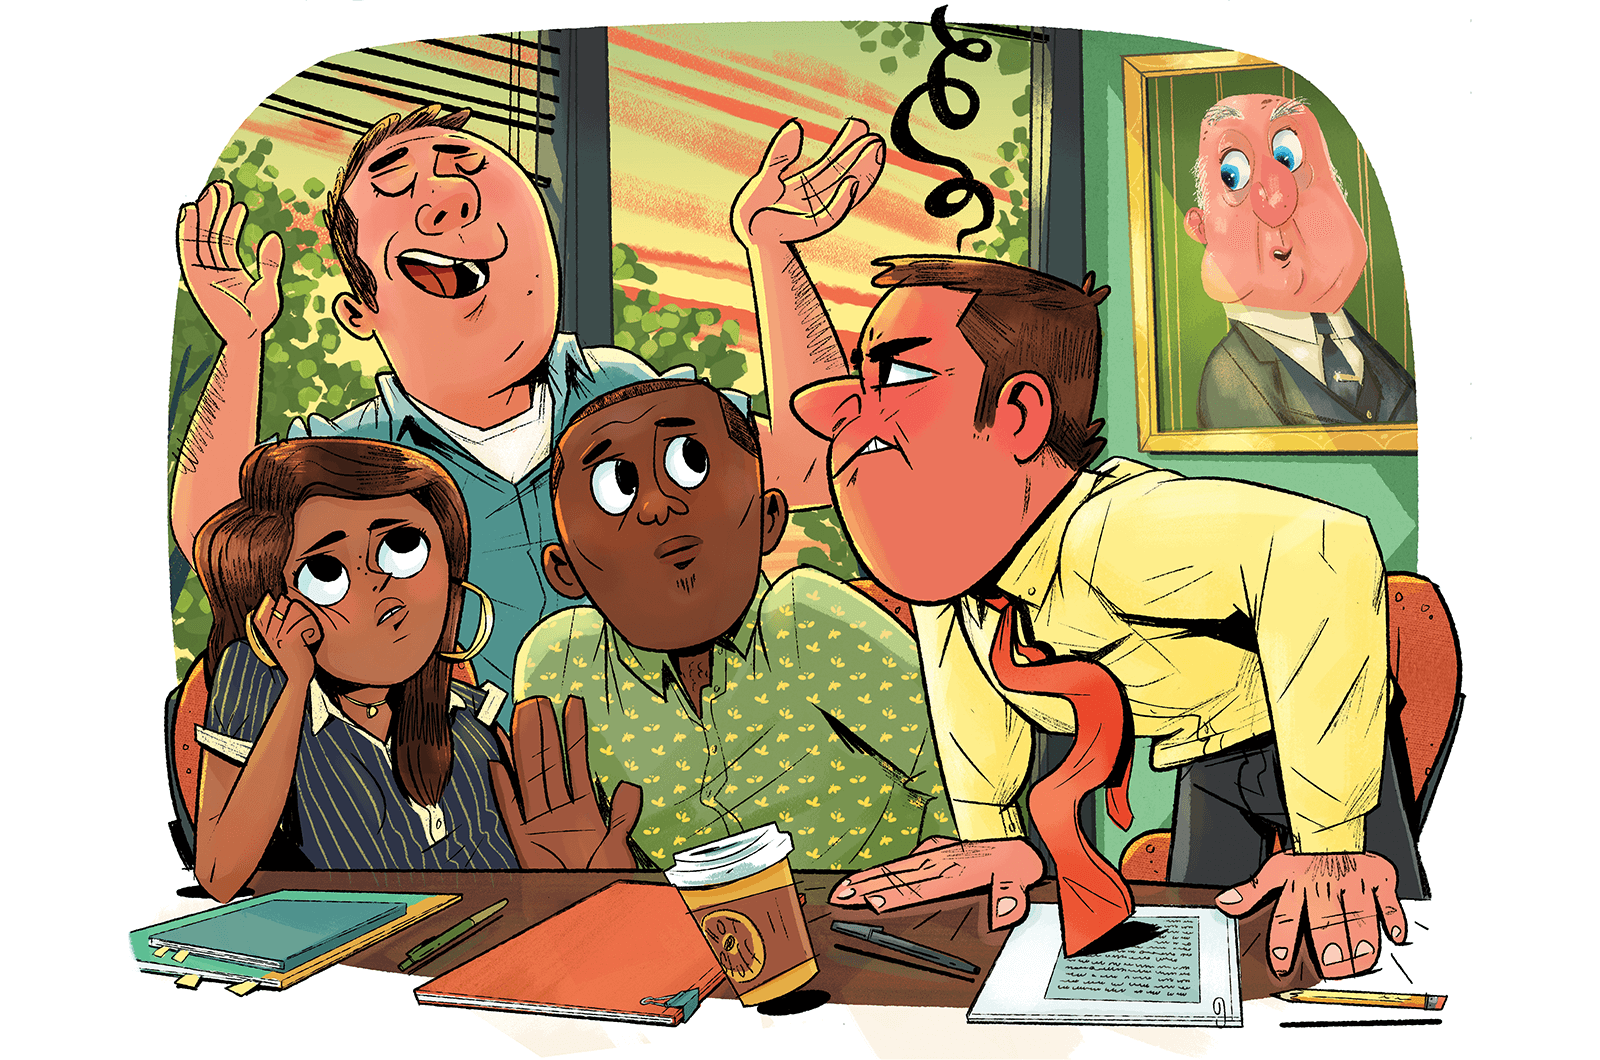 Illustration of co-workers being annoyed